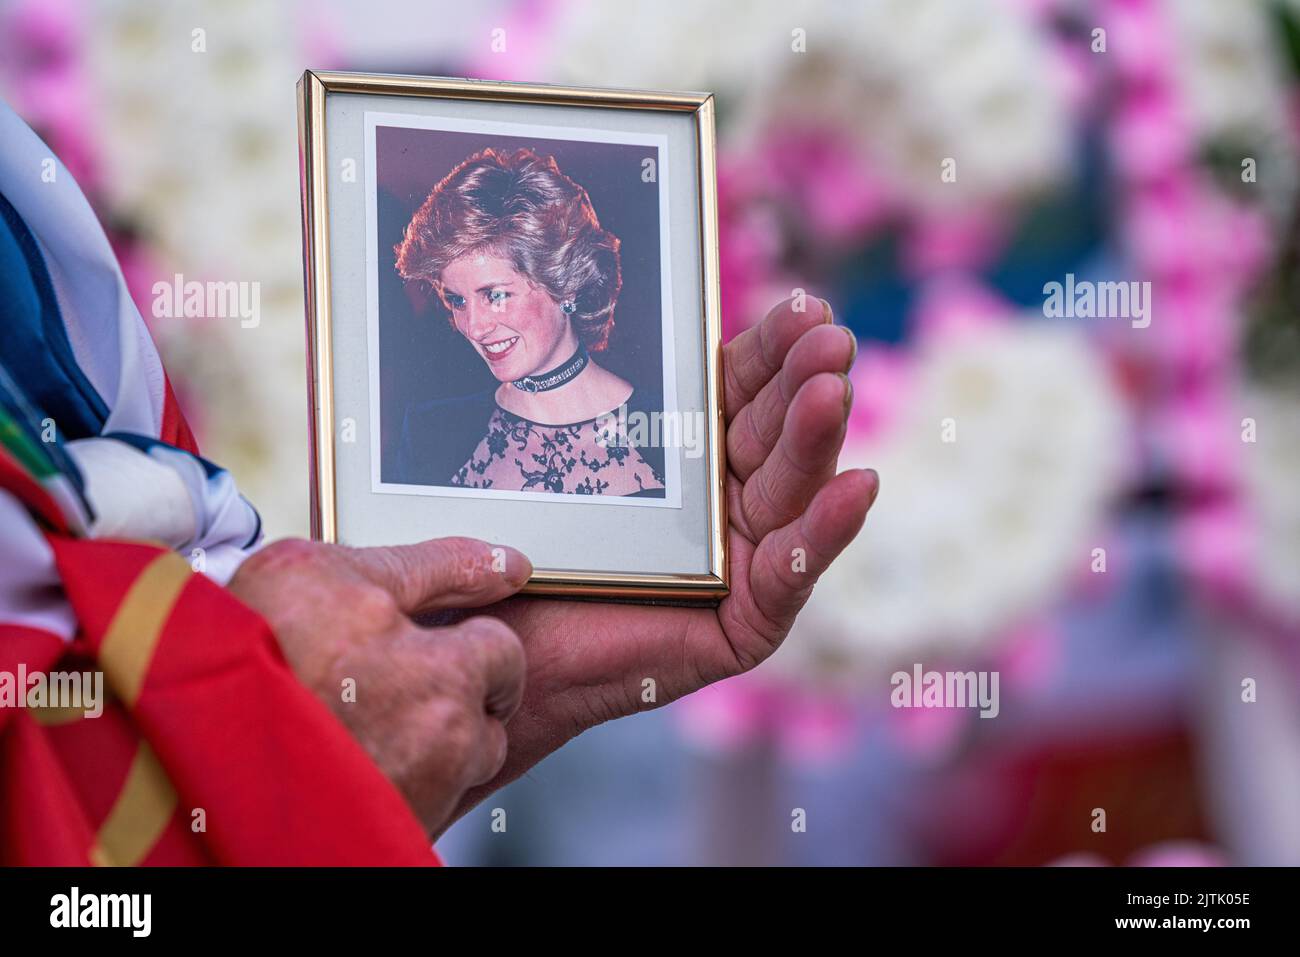 London, UK. 31 August 2022  A royal fan outsider Kensington Palace shows a frame portrait of  Princess  Diana on the 25th anniversary of her death on 31 August 1997 . Credit. amer ghazzal/Alamy Live News Stock Photo